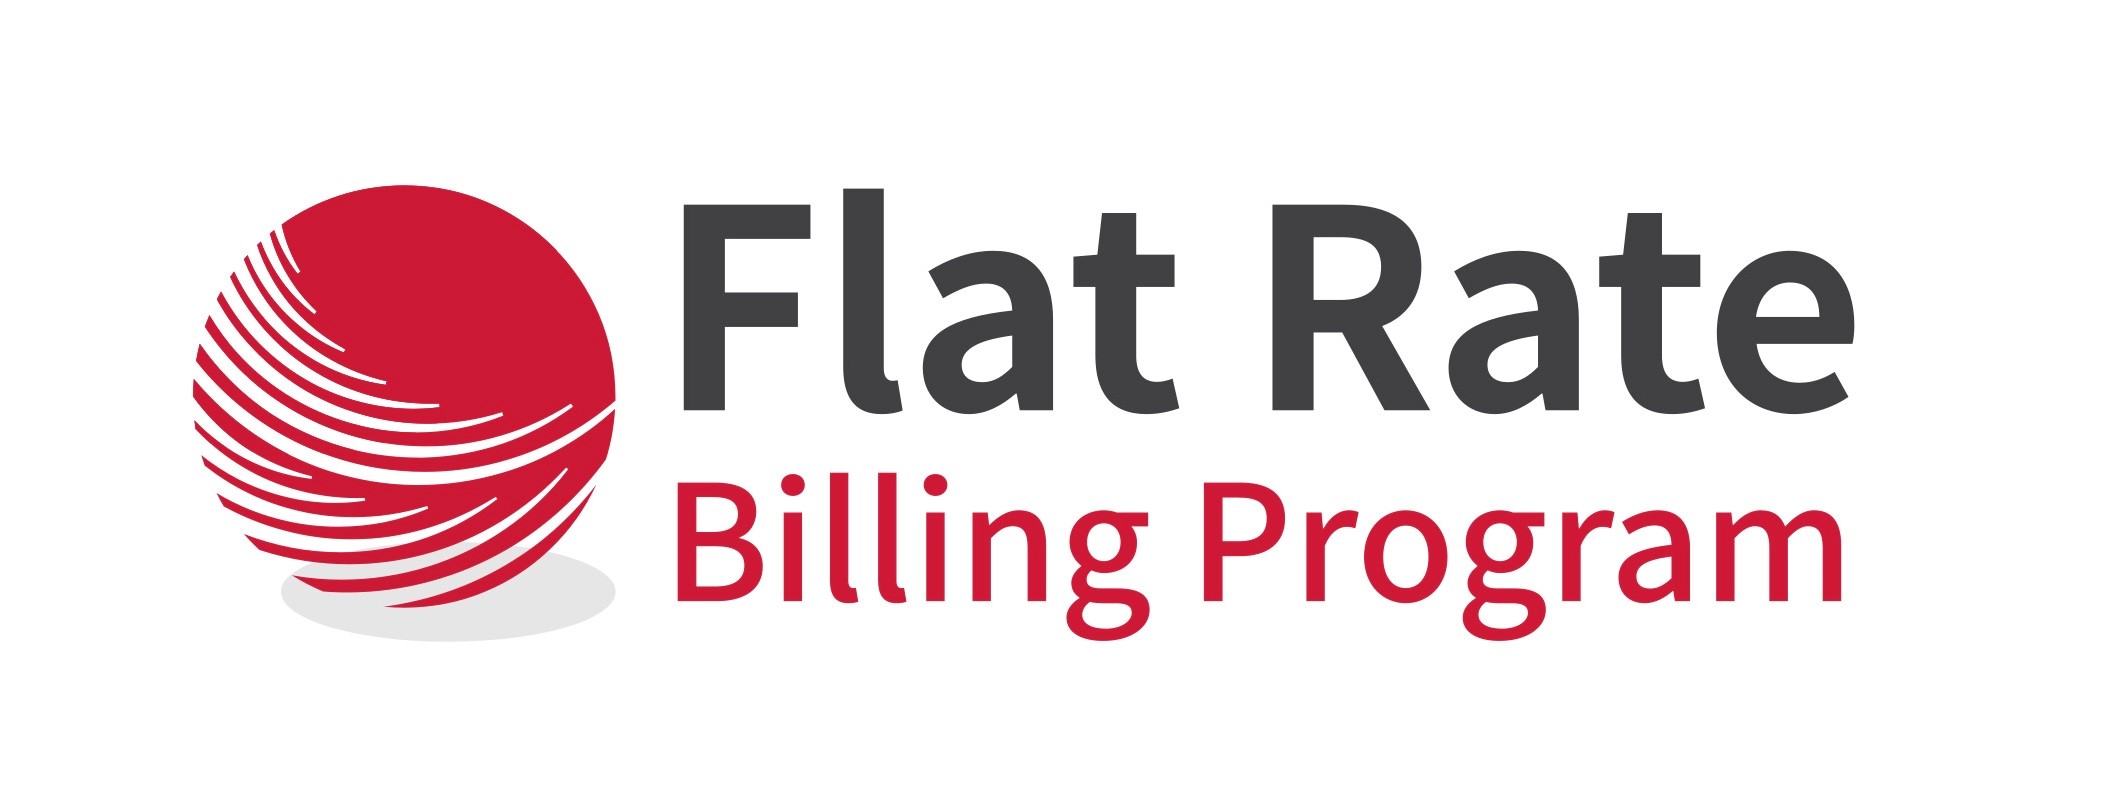 Flat Rate Billing Program, No more click rates, No more overage invoices